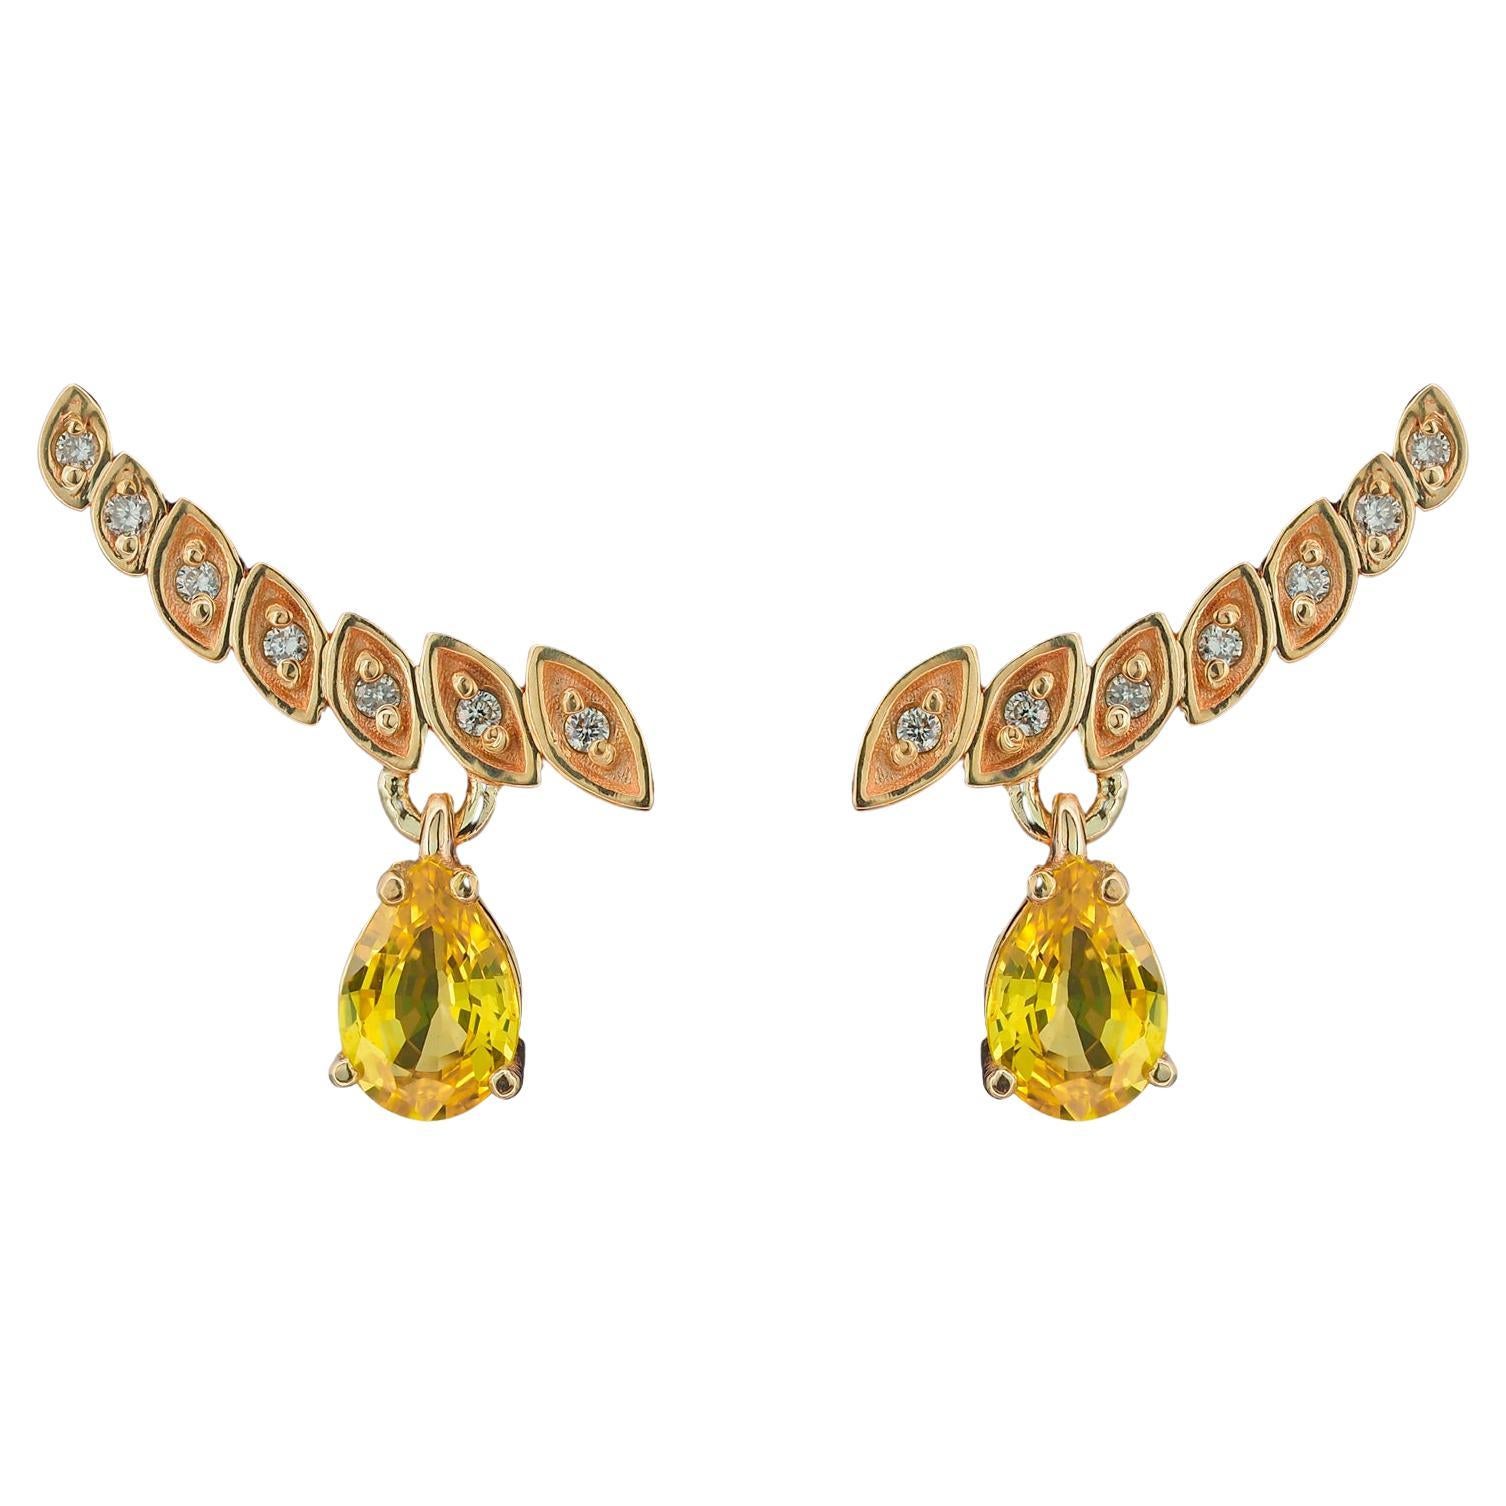 14k Gold Earrings with Pear Sapphires and Diamonds